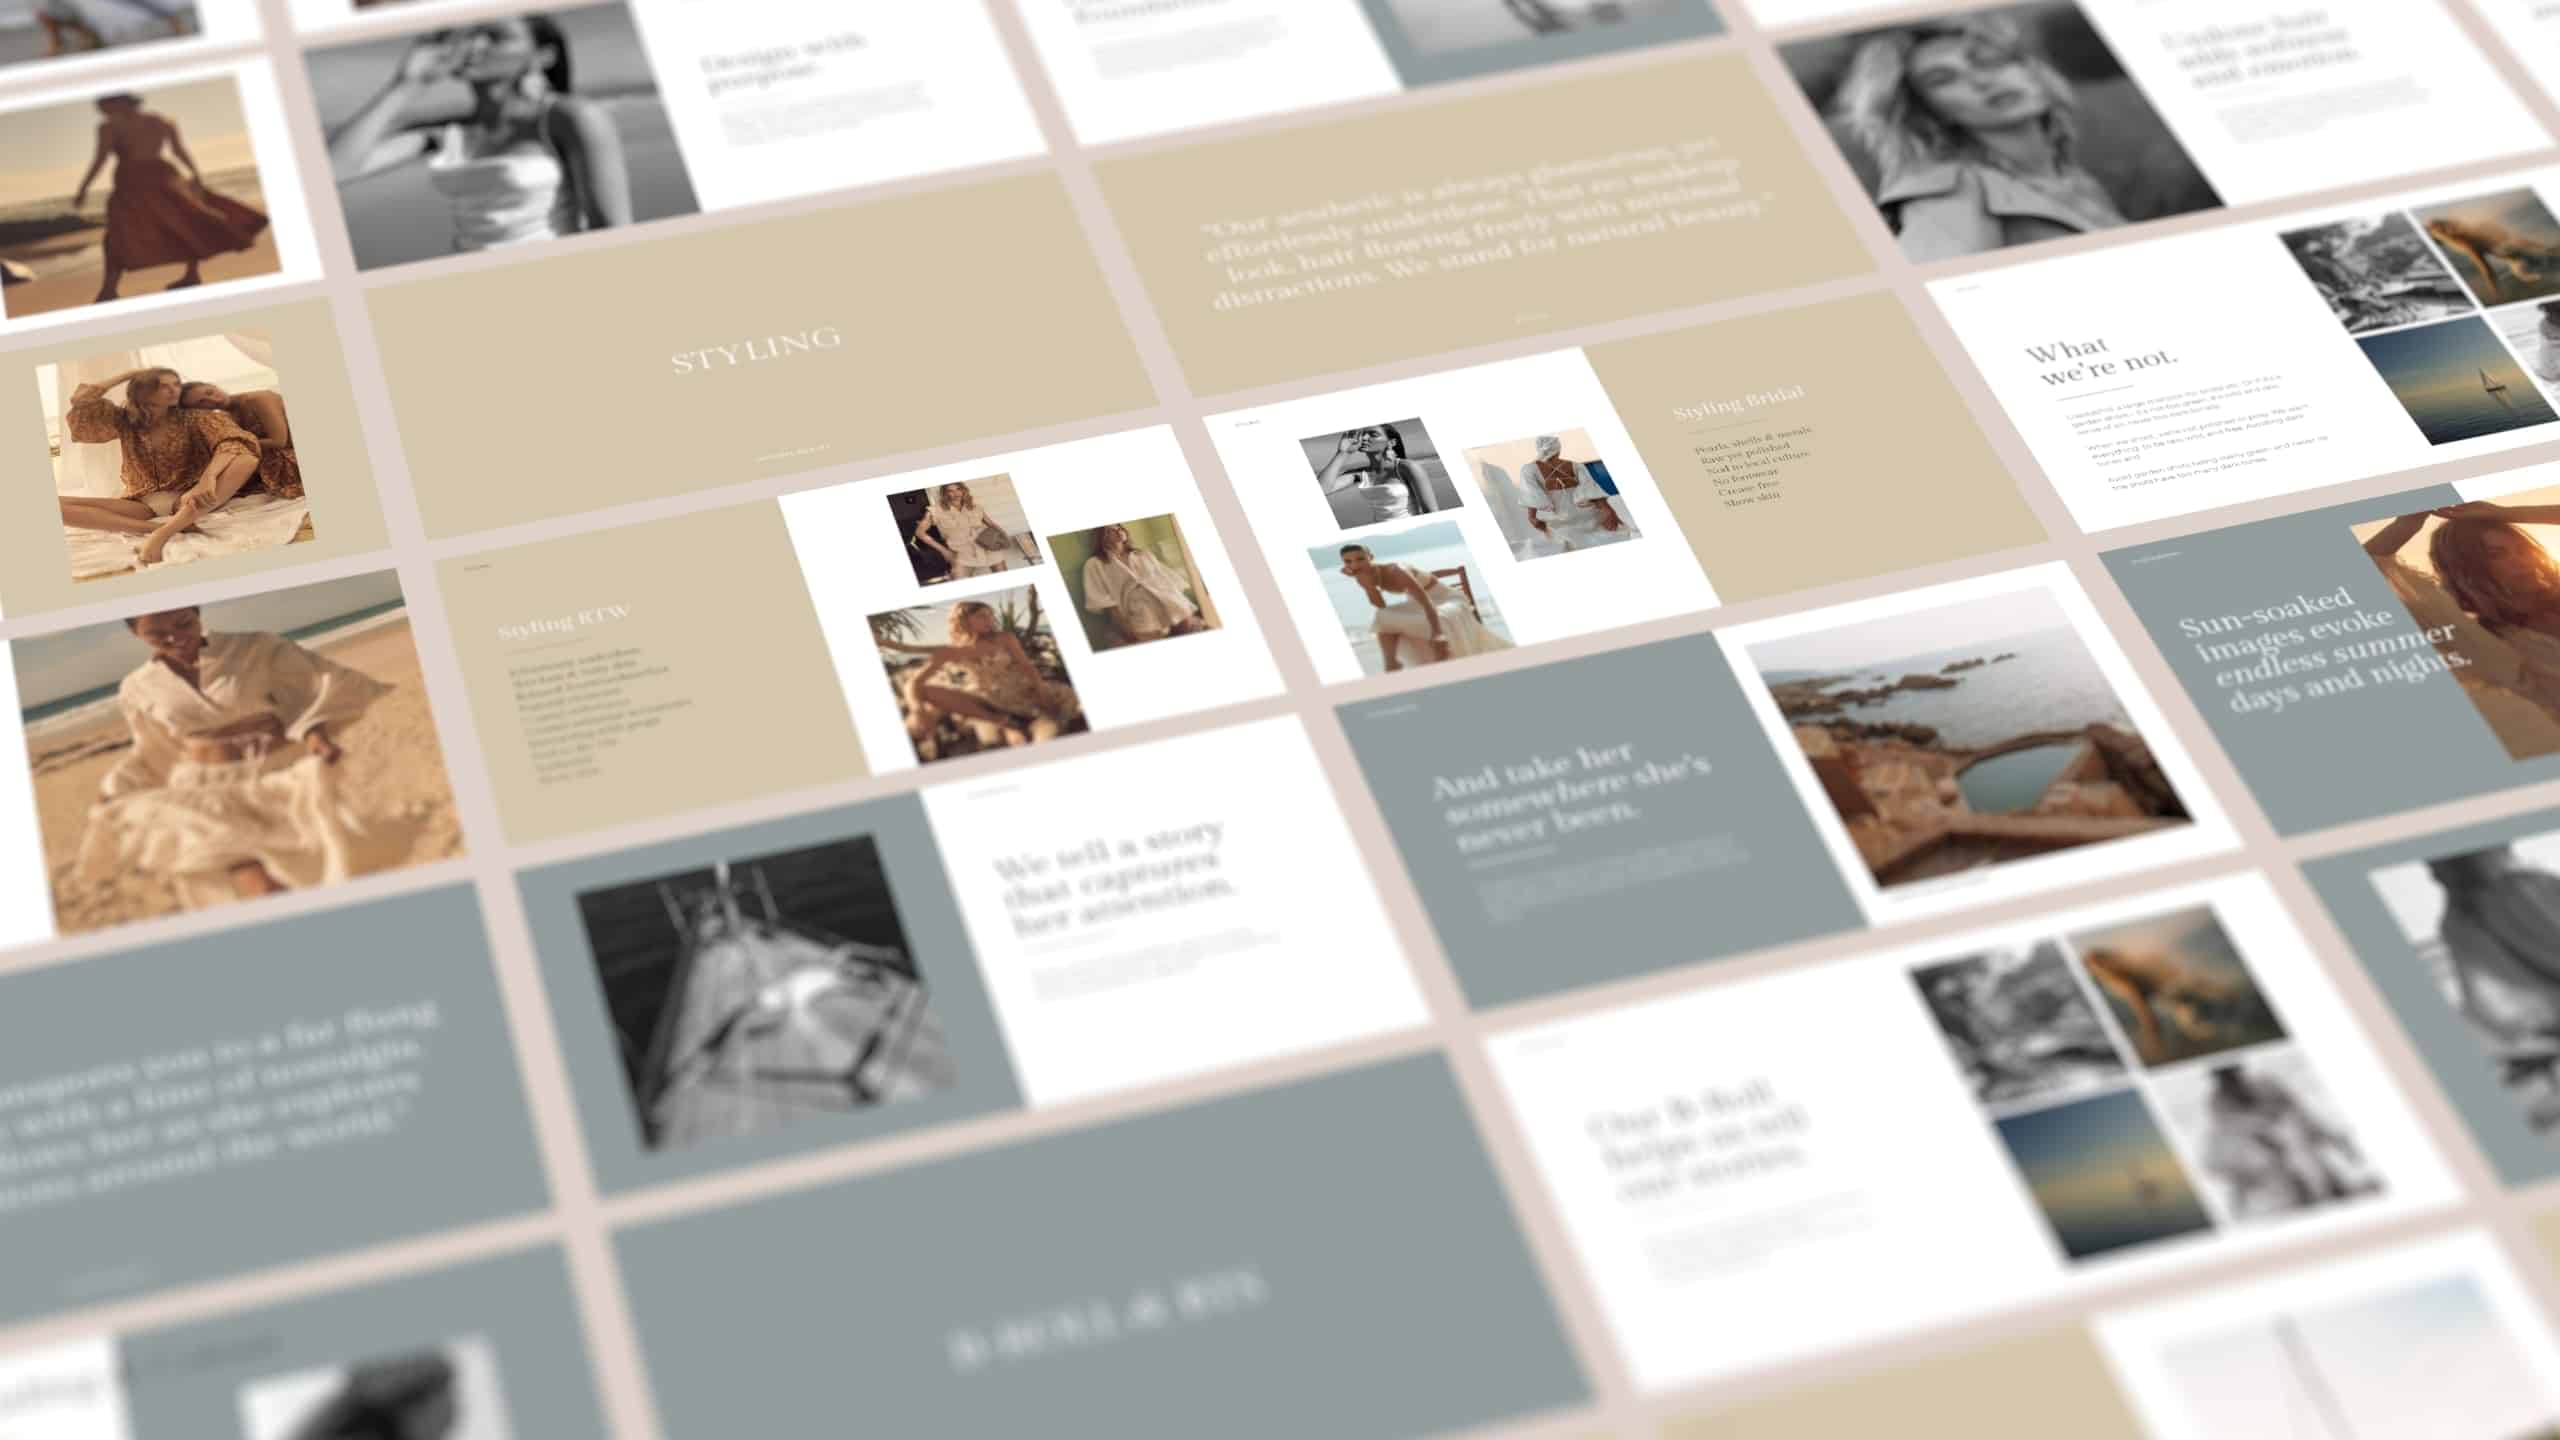 An image of multiple pages of the Shona Joy brand style guide document